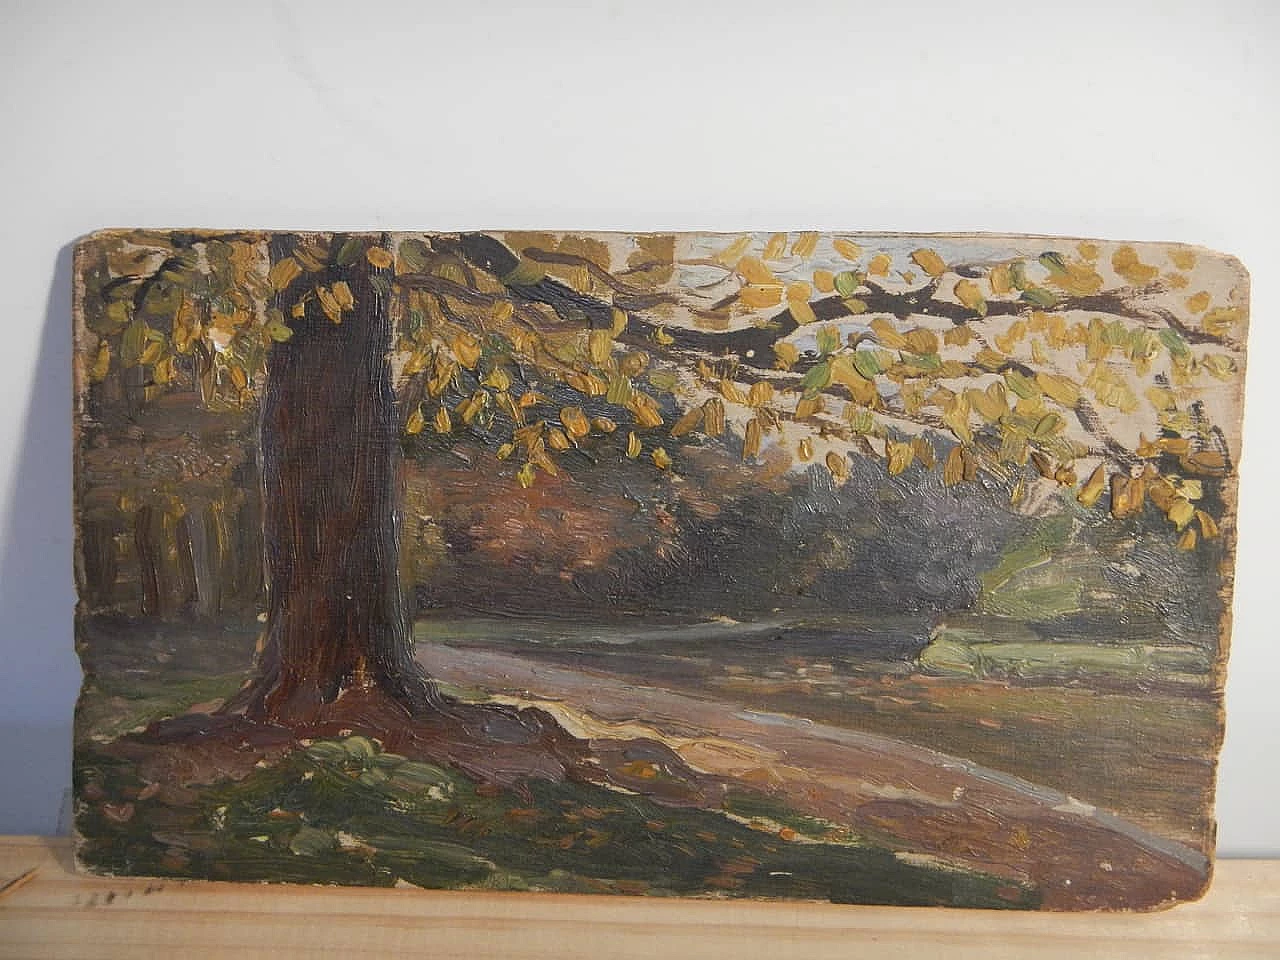 Des Champs, tree trunk, painting on wood, early 20th century 7